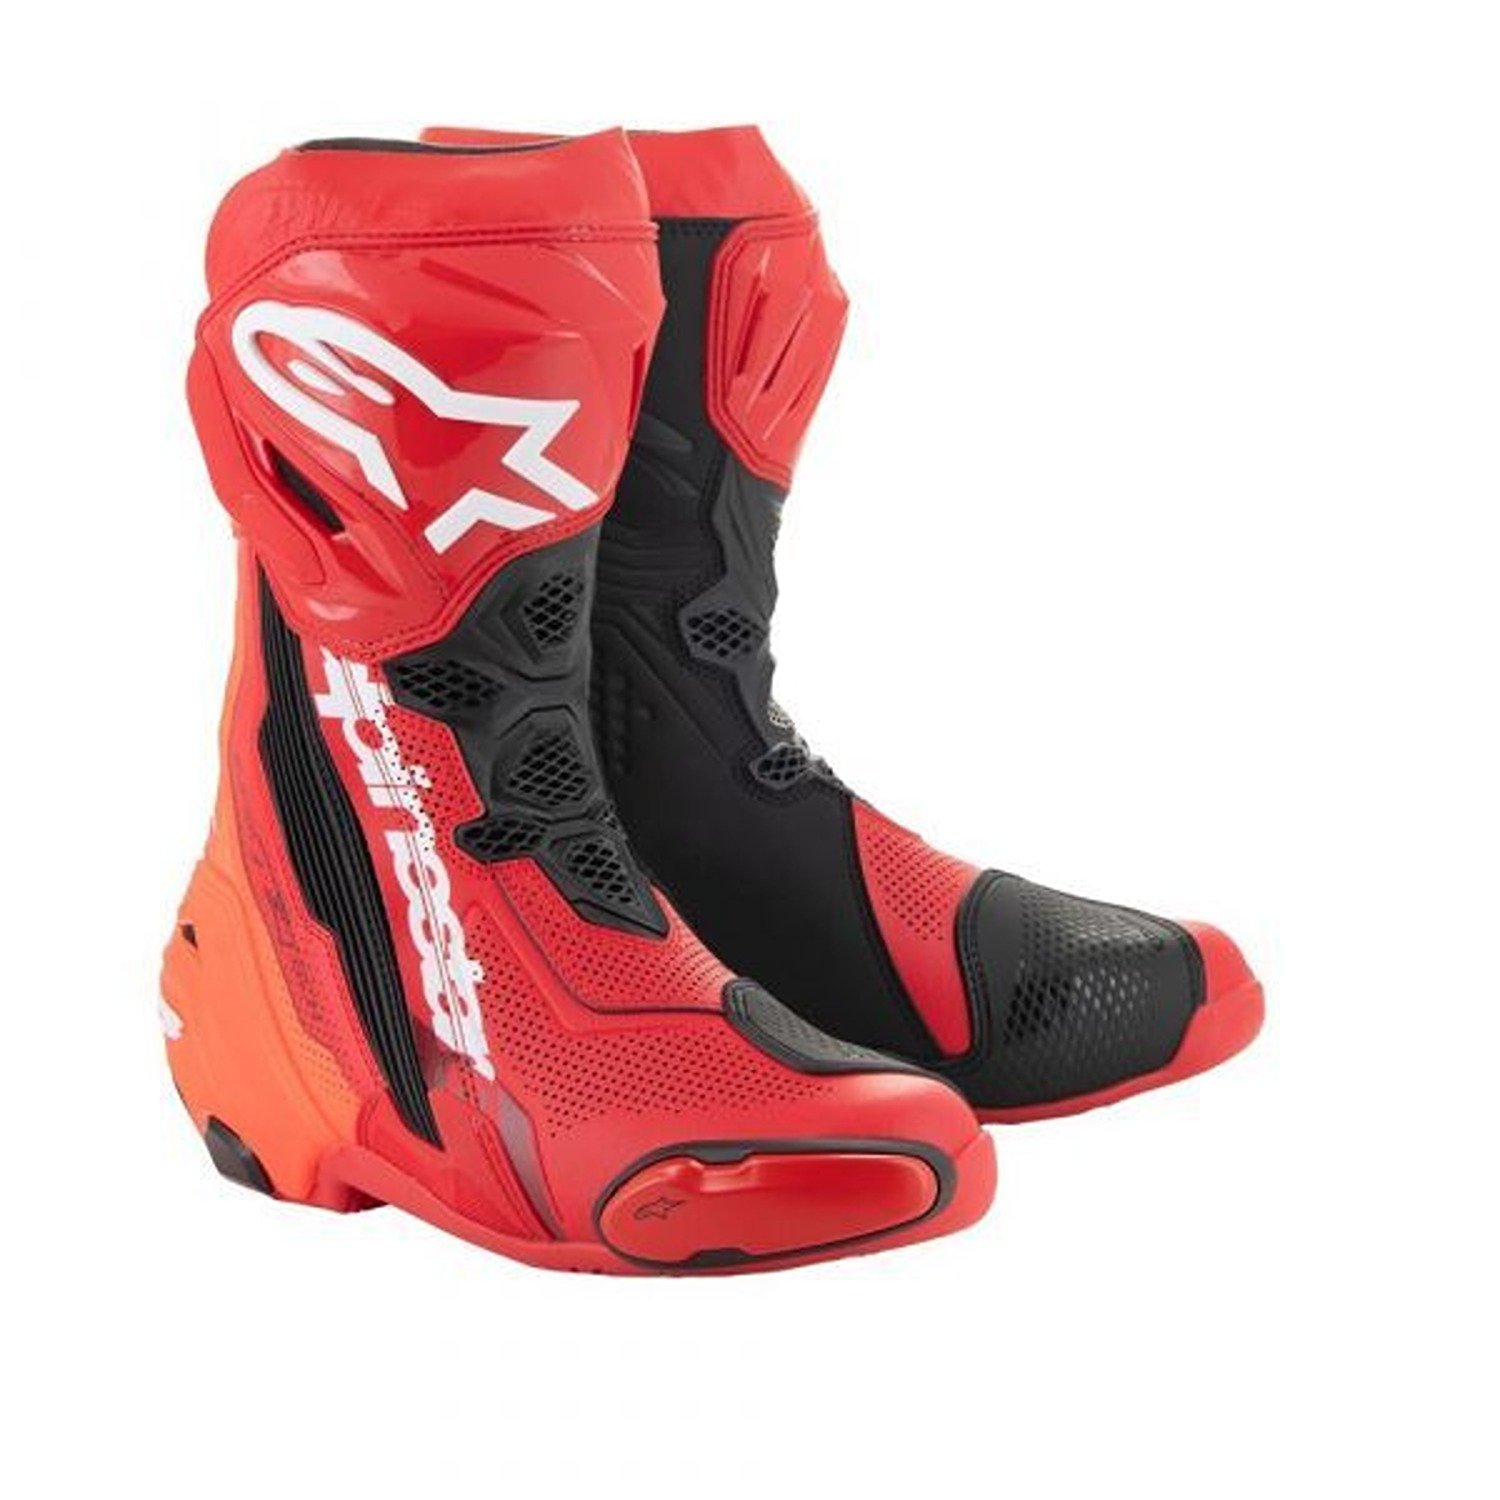 Image of Alpinestars Supertech R Vented Boots Bright Red Fluo Size 45 ID 8059347377957